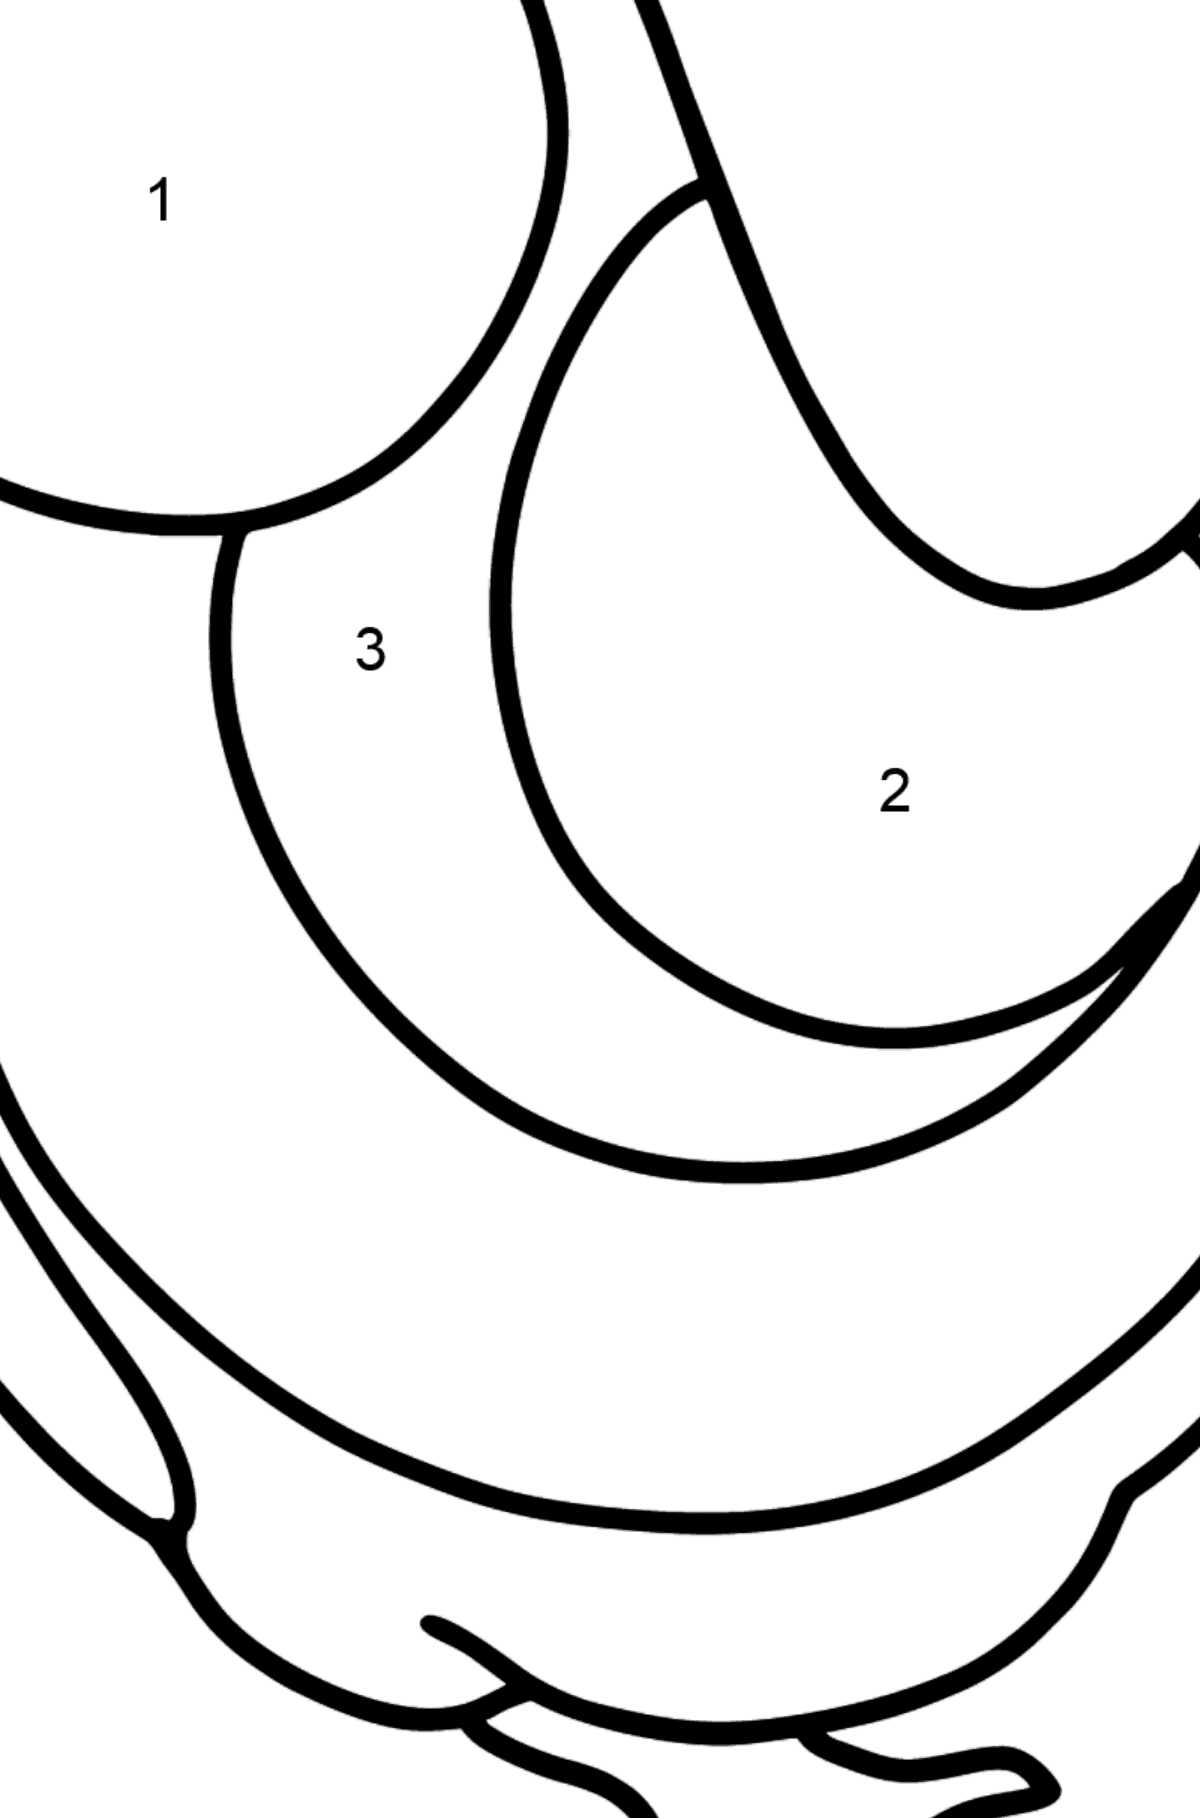 Simple coloring page with a Tit - Coloring by Numbers for Kids